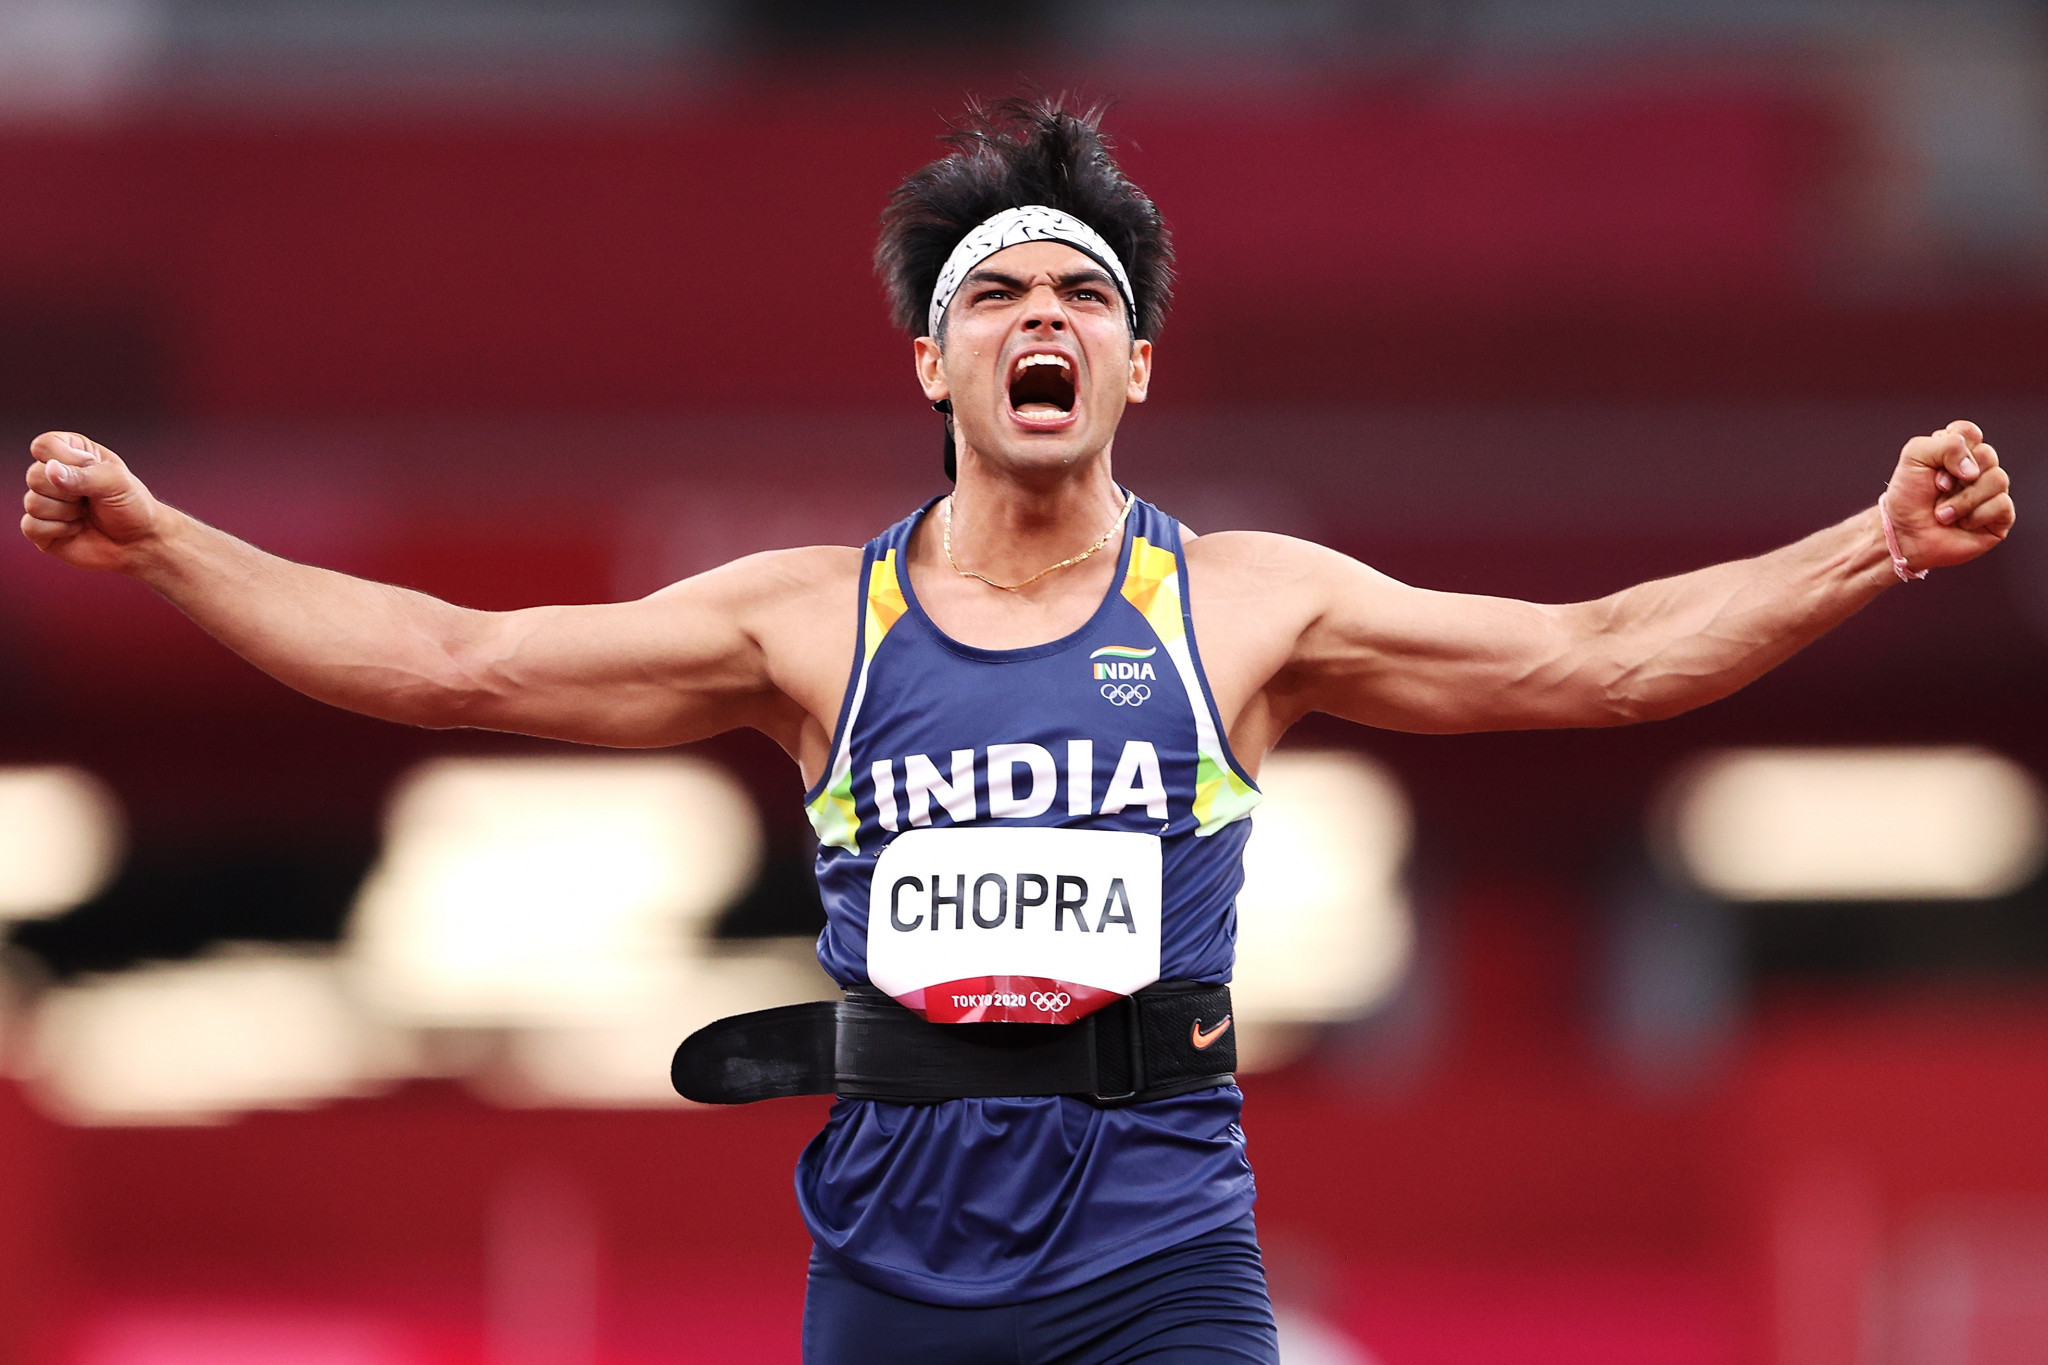 Olympic javelin champion Neeraj Chopra will be among India's gold-medal hopes at this year's Asian Games ©Getty Images